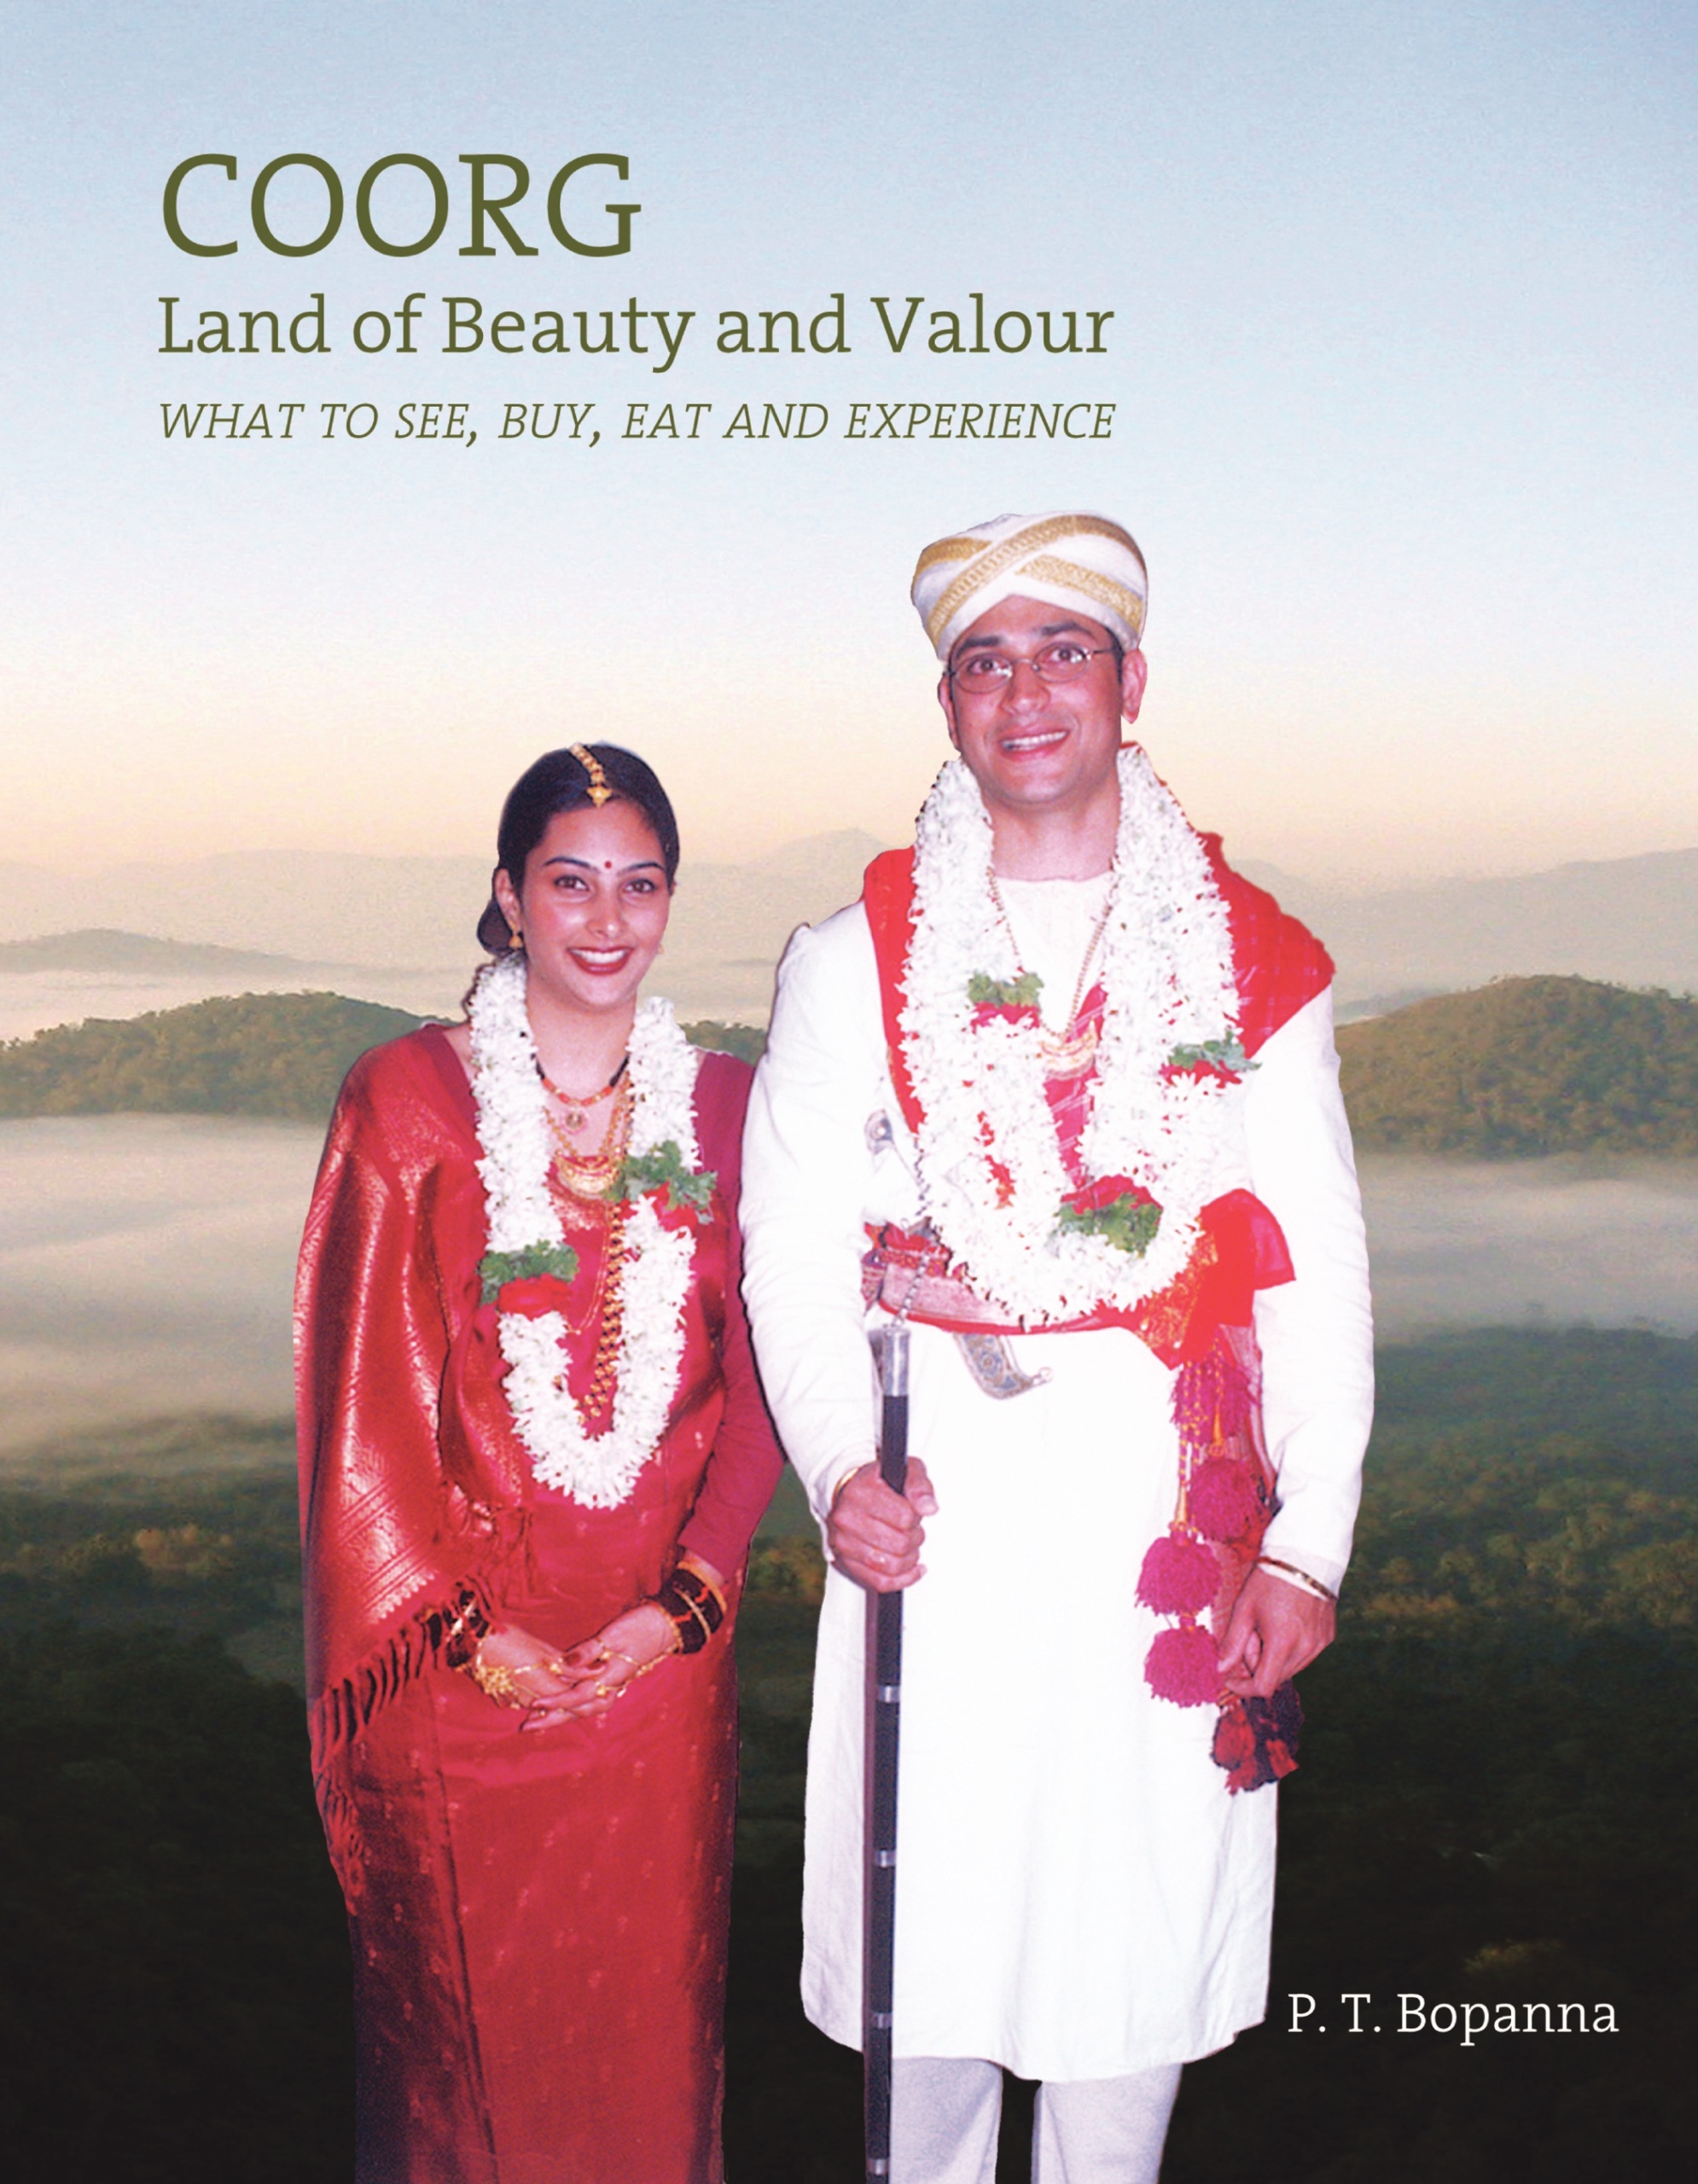  ‘COORG: LAND OF BEAUTY AND VALOUR’ BOOK IS NOW AVAILABLE ON ‘PRINT-ON-DEMAND’